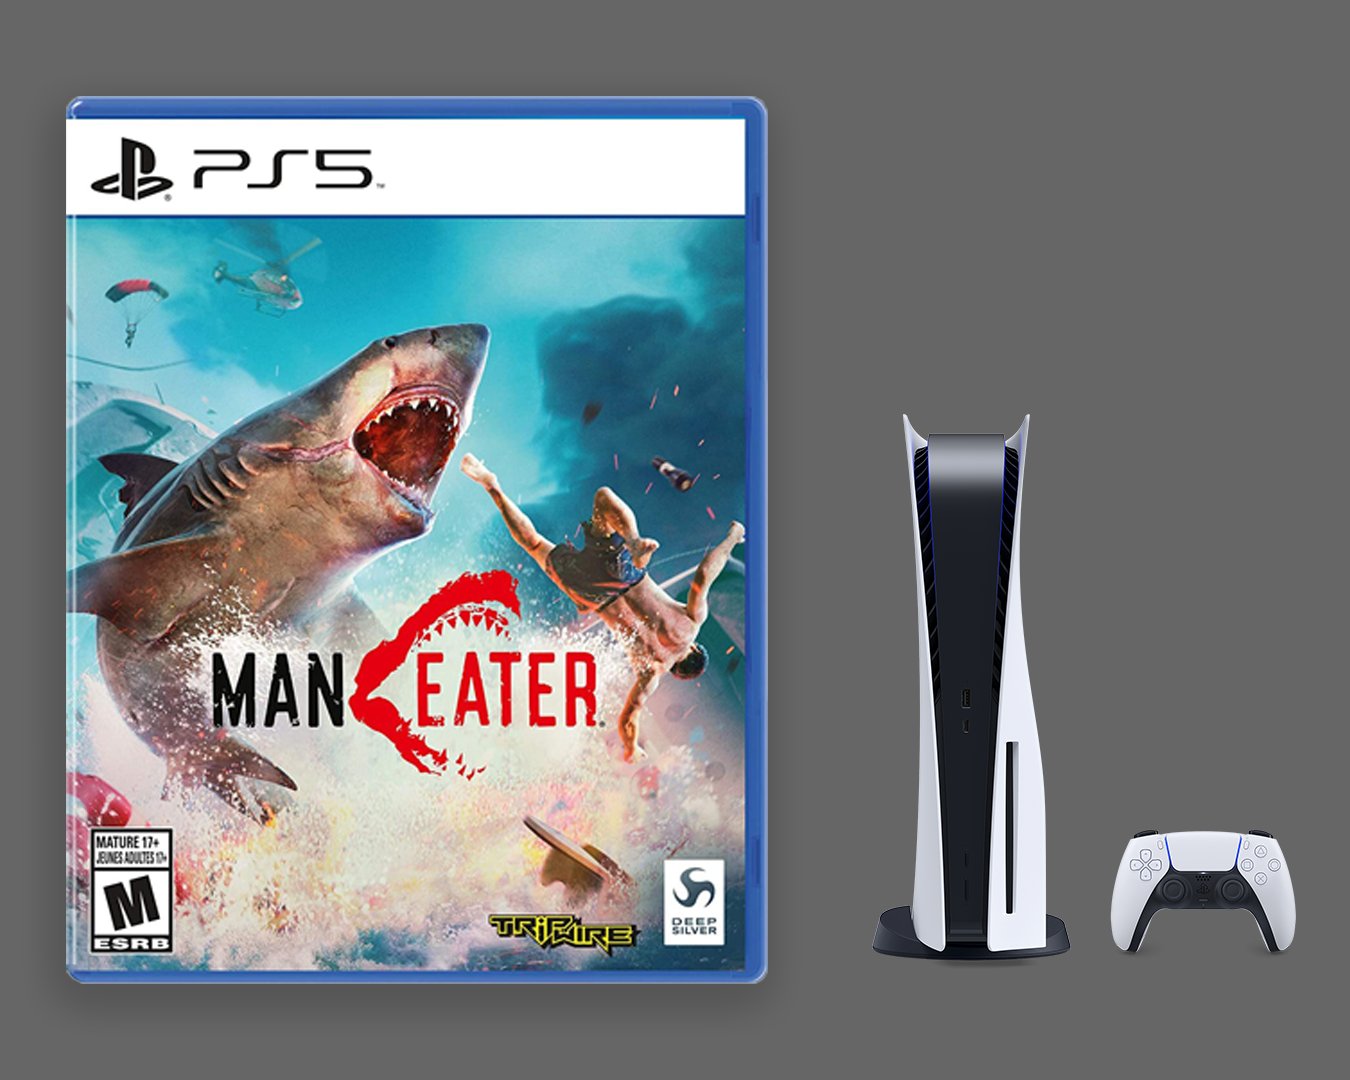 Maneater on Twitter: "If you thought the PS5 was big, then wait til you  take a look at the size of the Maneater MEGALODON EDITION! Available  November 12th. @PlayStation They're gonna need